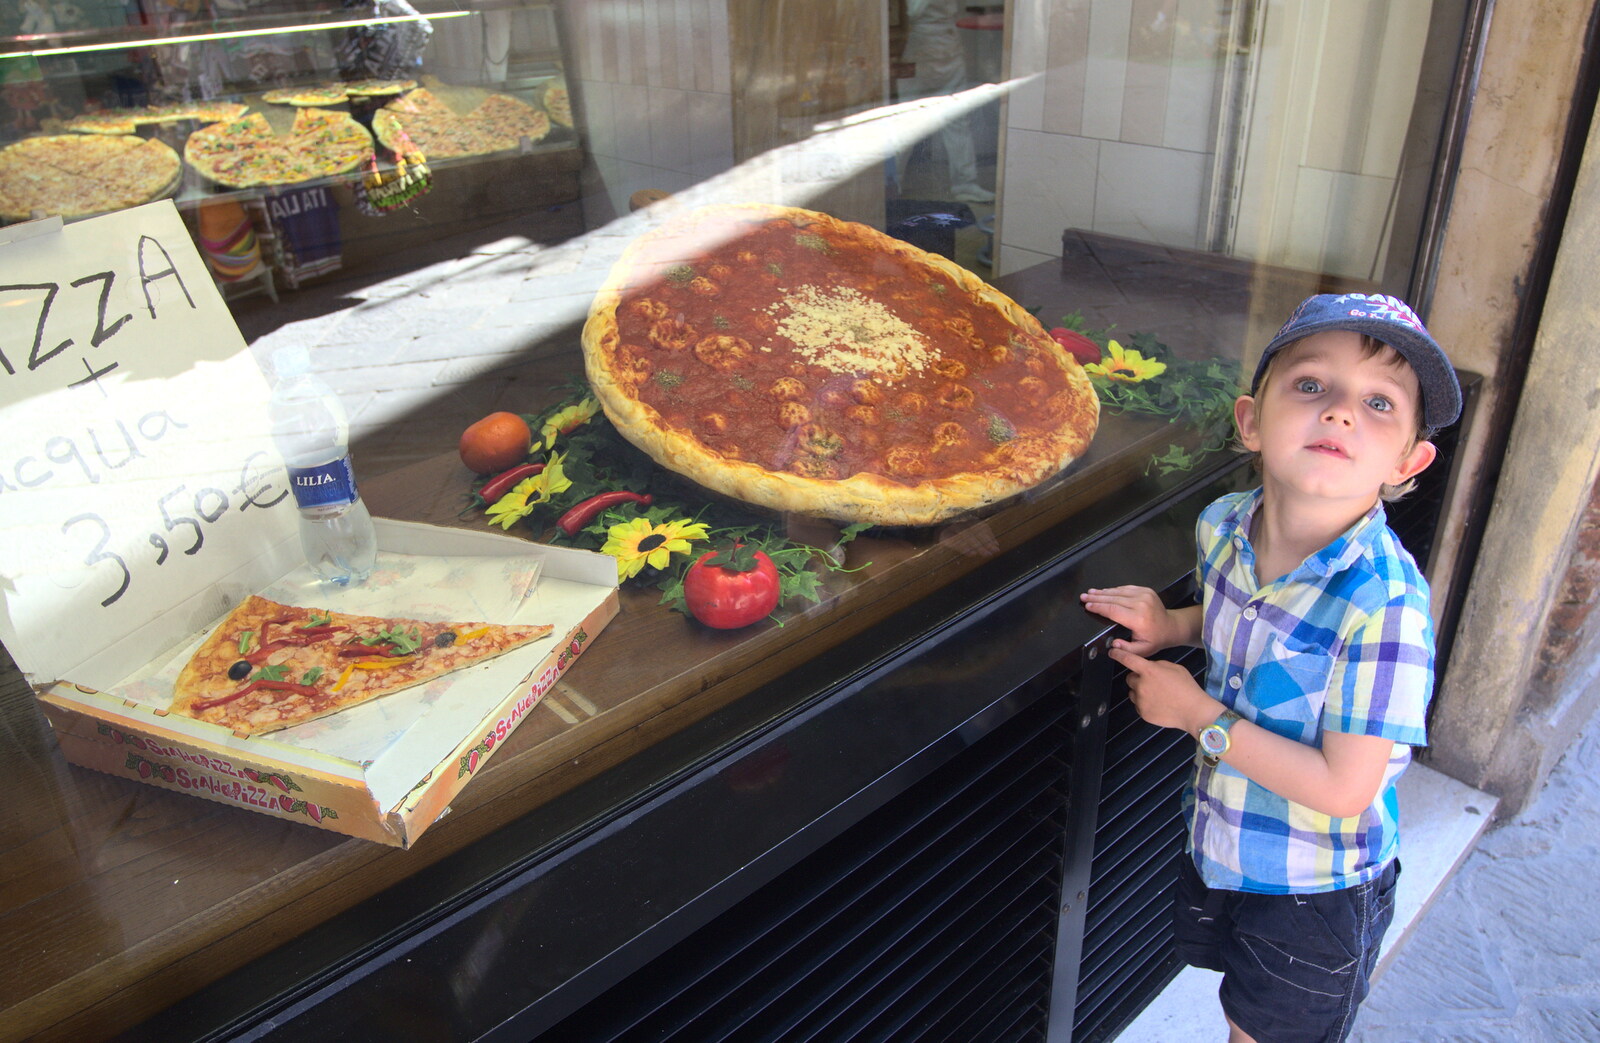 A Tuscan Winery and a Trip to Siena, Tuscany, Italy - 10th June 2013: Fred stands next to a giant pizza